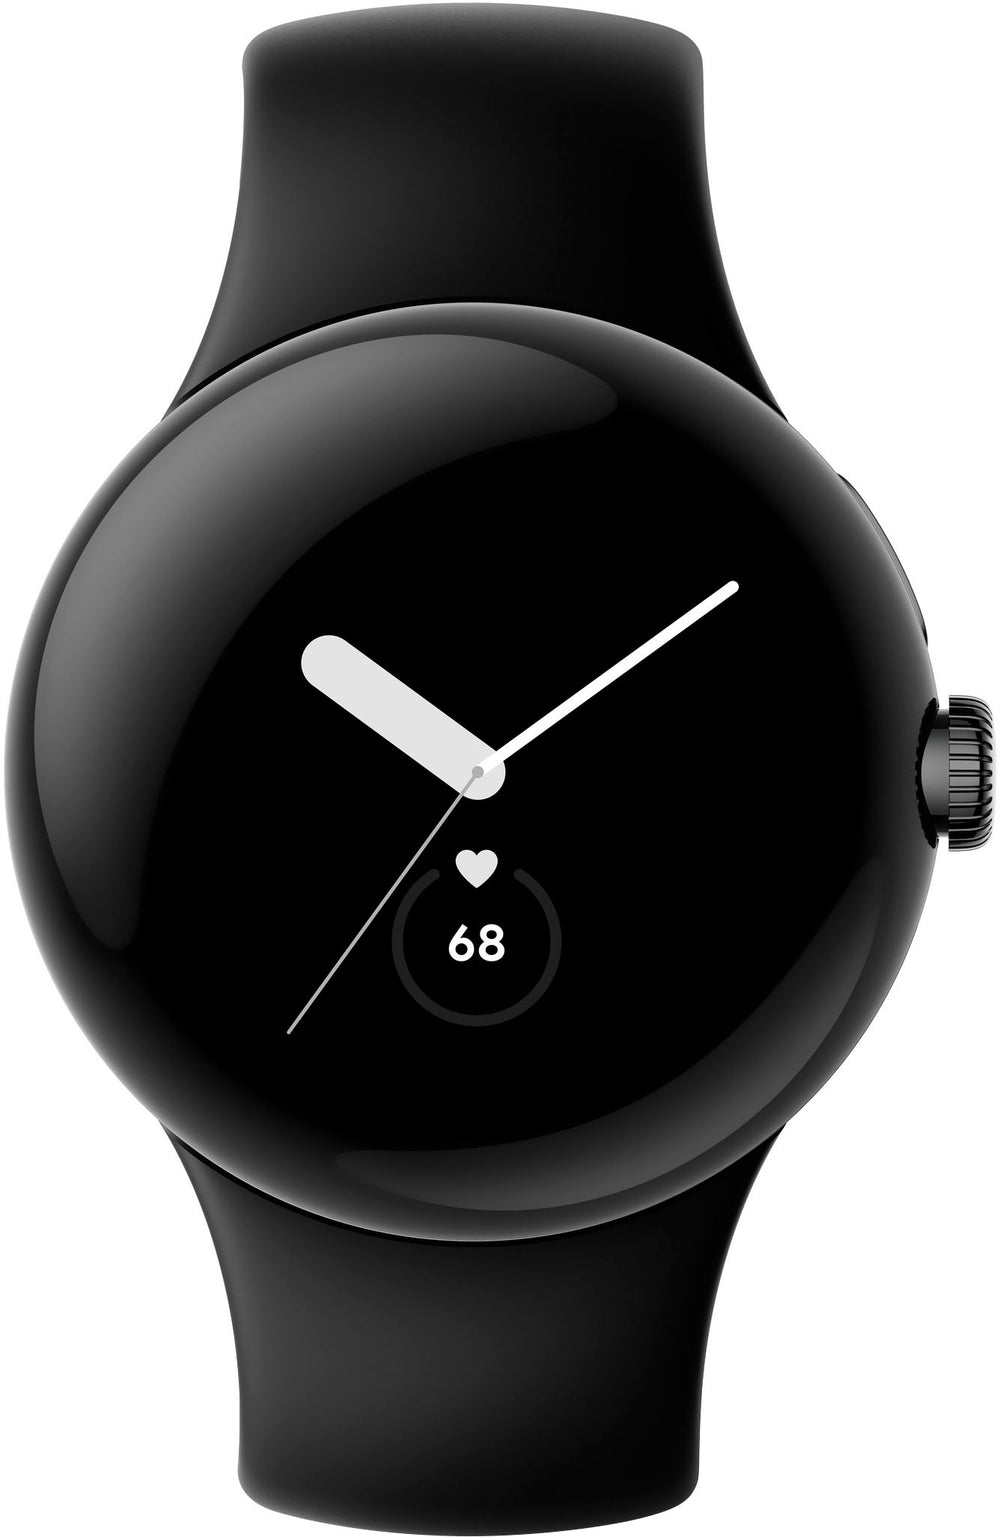 Google - Pixel Watch Black Stainless Steel Smartwatch 41mm with Obsidian Active Band LTE - Black/Obsidian_1